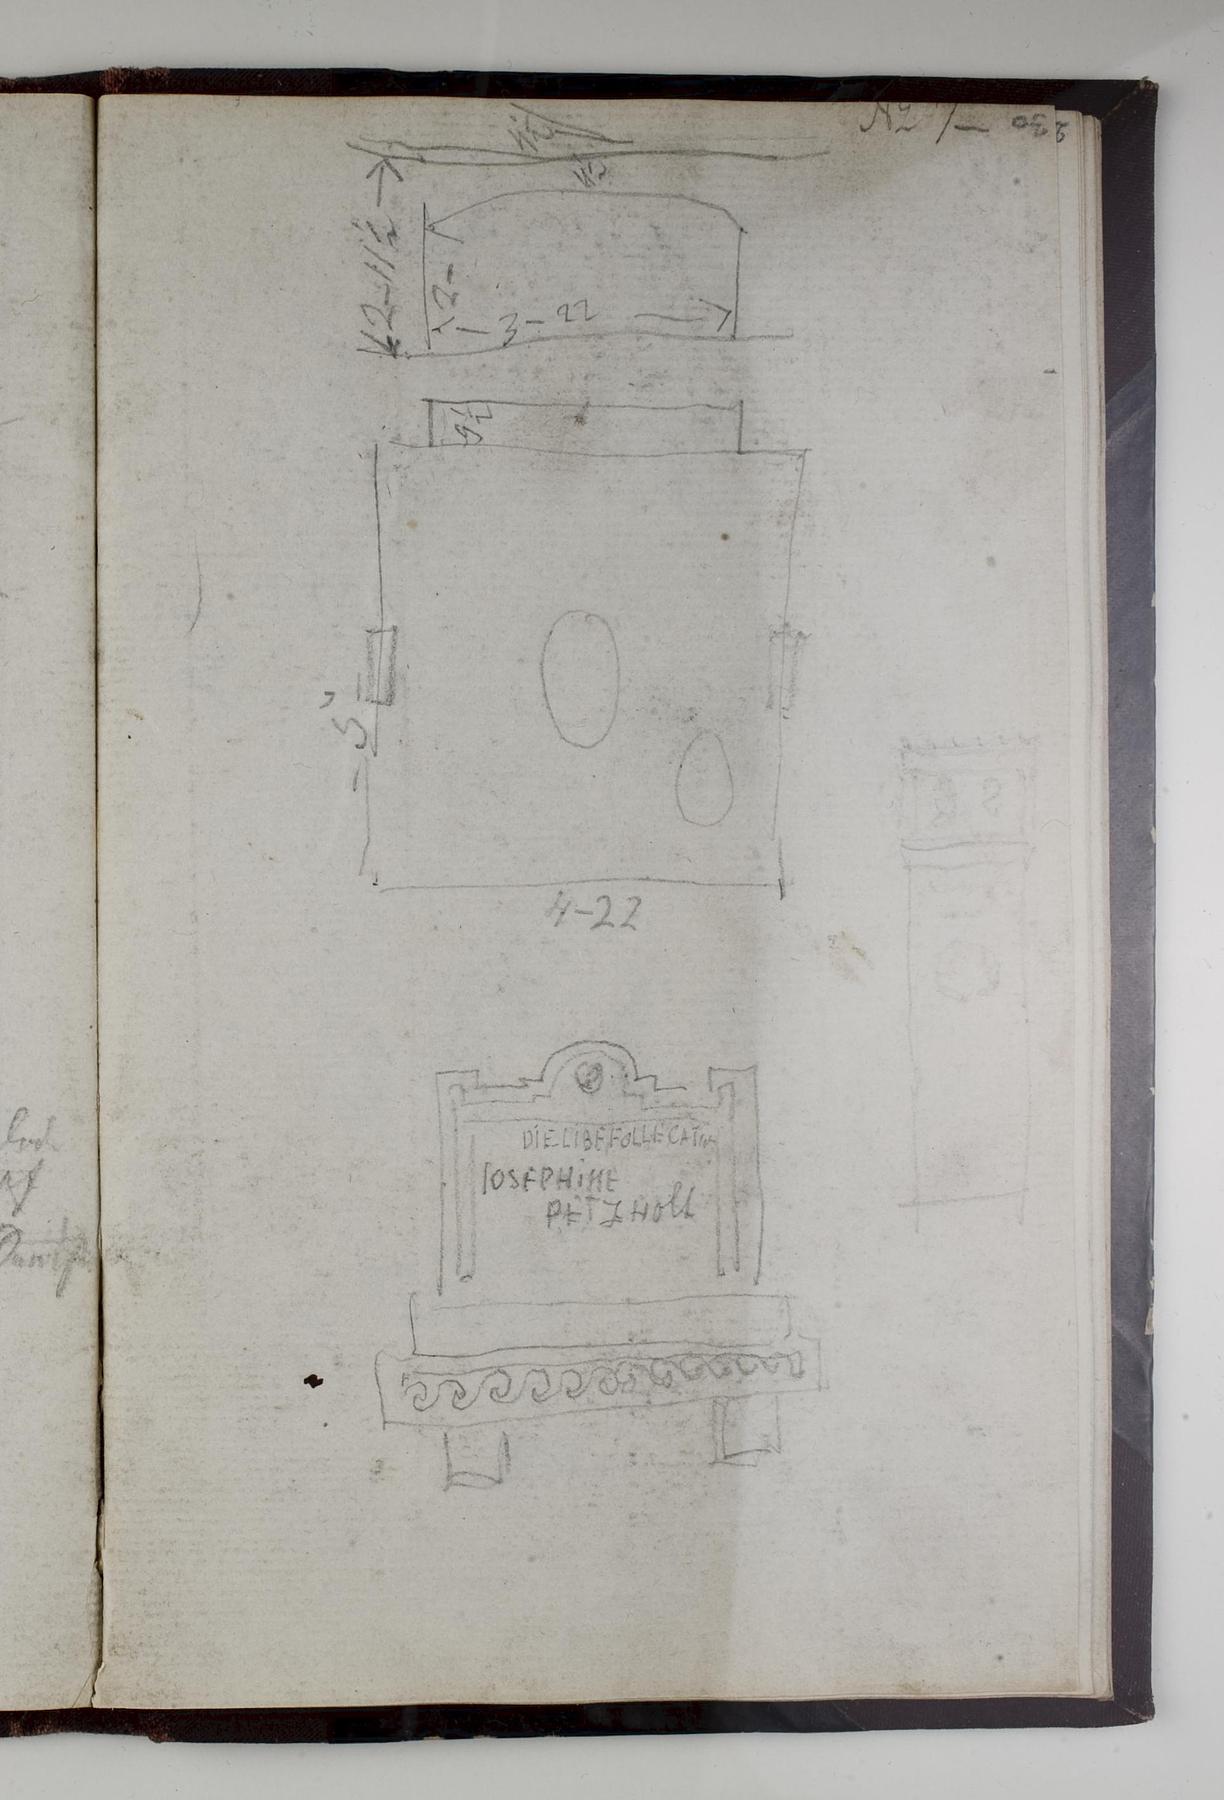 Sepulchral Monument to Josephine Petzholdt, Plan and Elevations, D1778,30